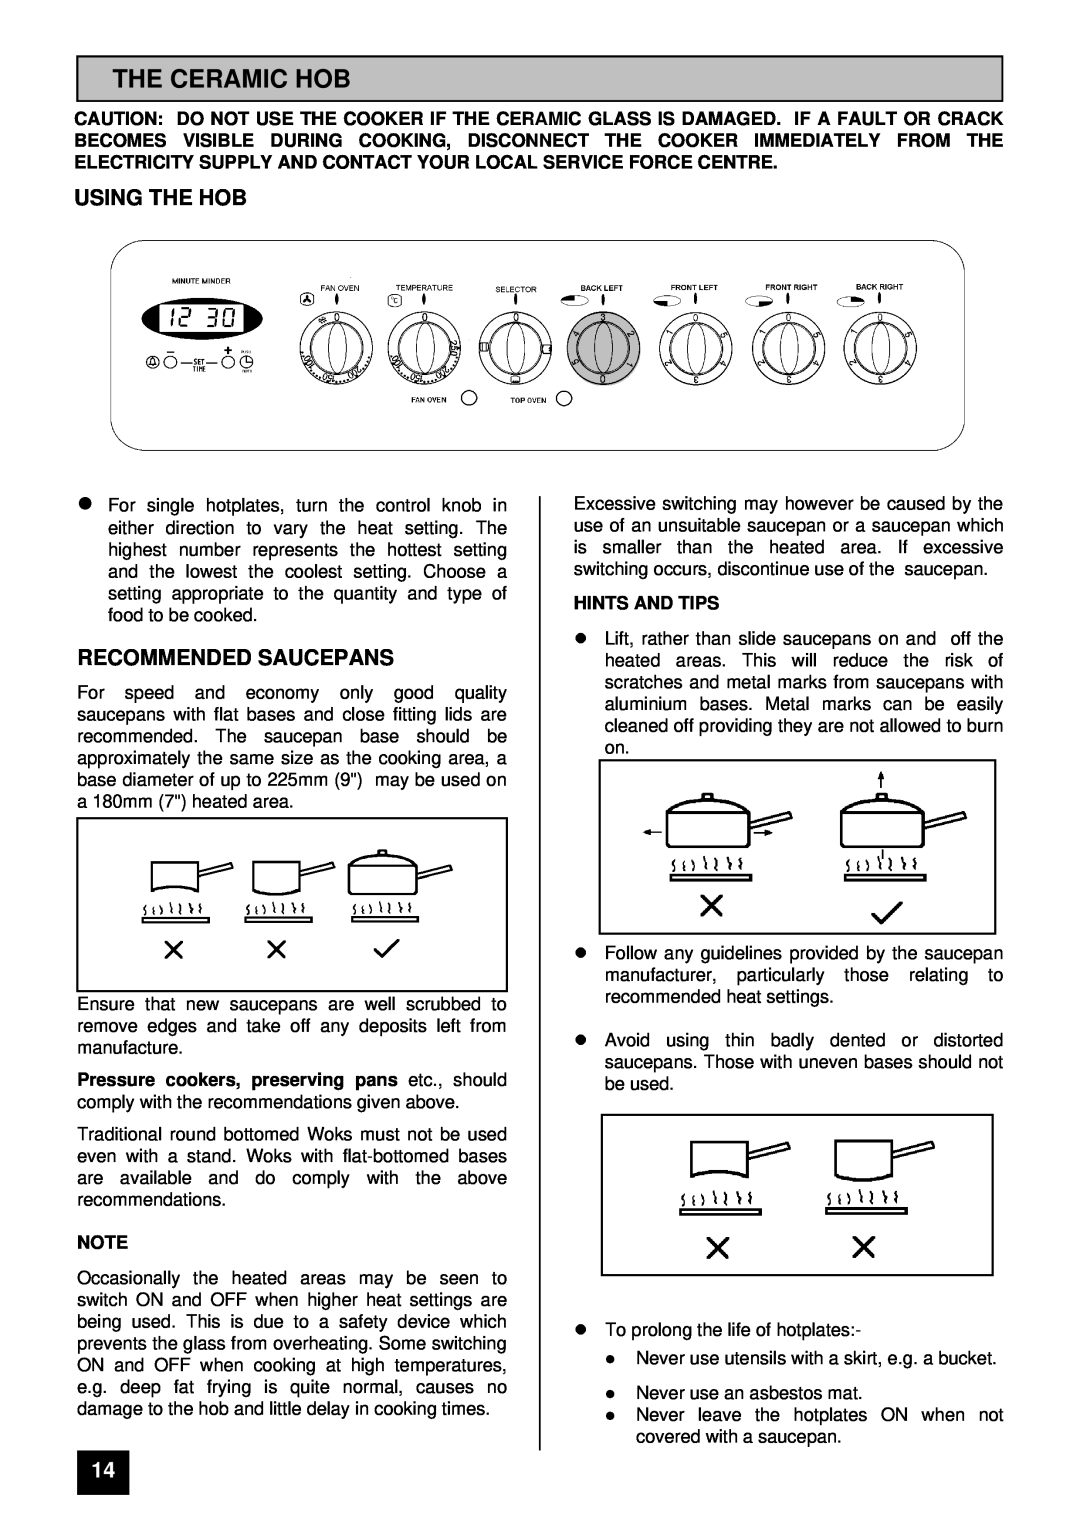 Tricity Bendix RE60GC installation instructions The Ceramic Hob, Using The Hob, Recommended Saucepans, lHINTS AND TIPS 